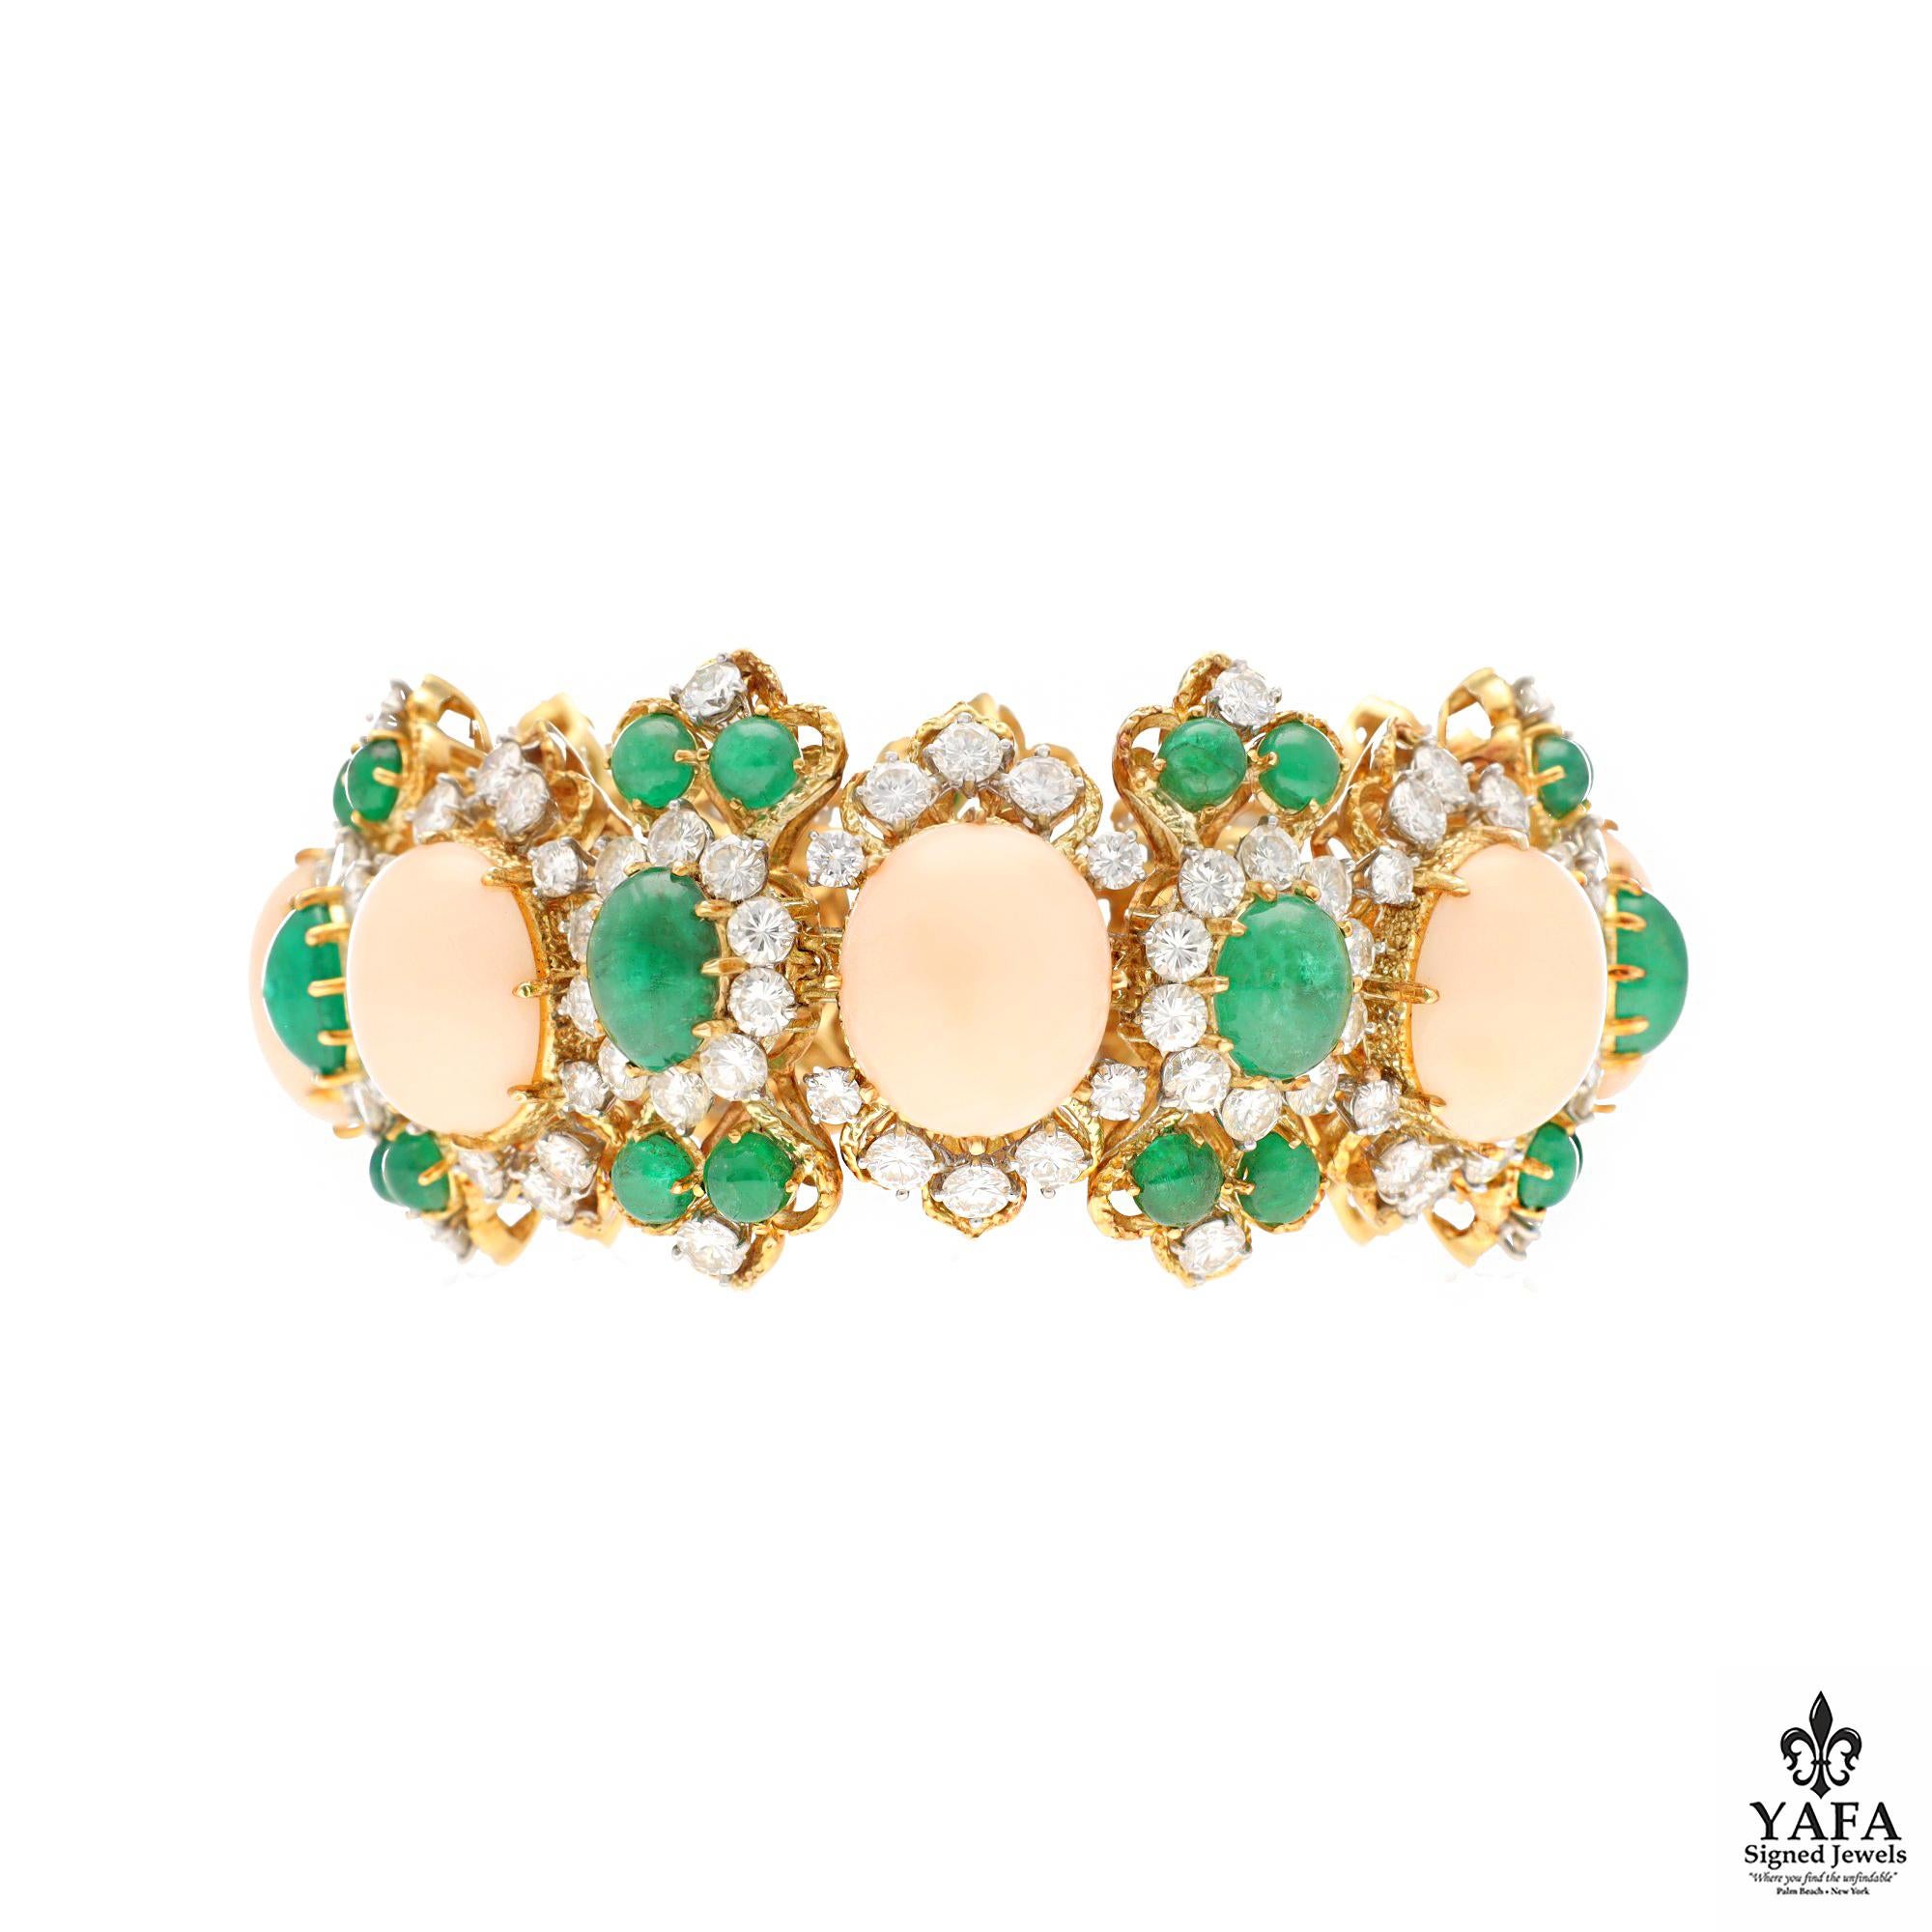 A glamorous 18k yellow gold and platinum Bulgari bracelet set with alternating oval-shaped cabochon coral and cabochon emeralds surrounded by round diamonds. Accompanied with CITES document.
Circa 1960s
Inner circumference approximately 6